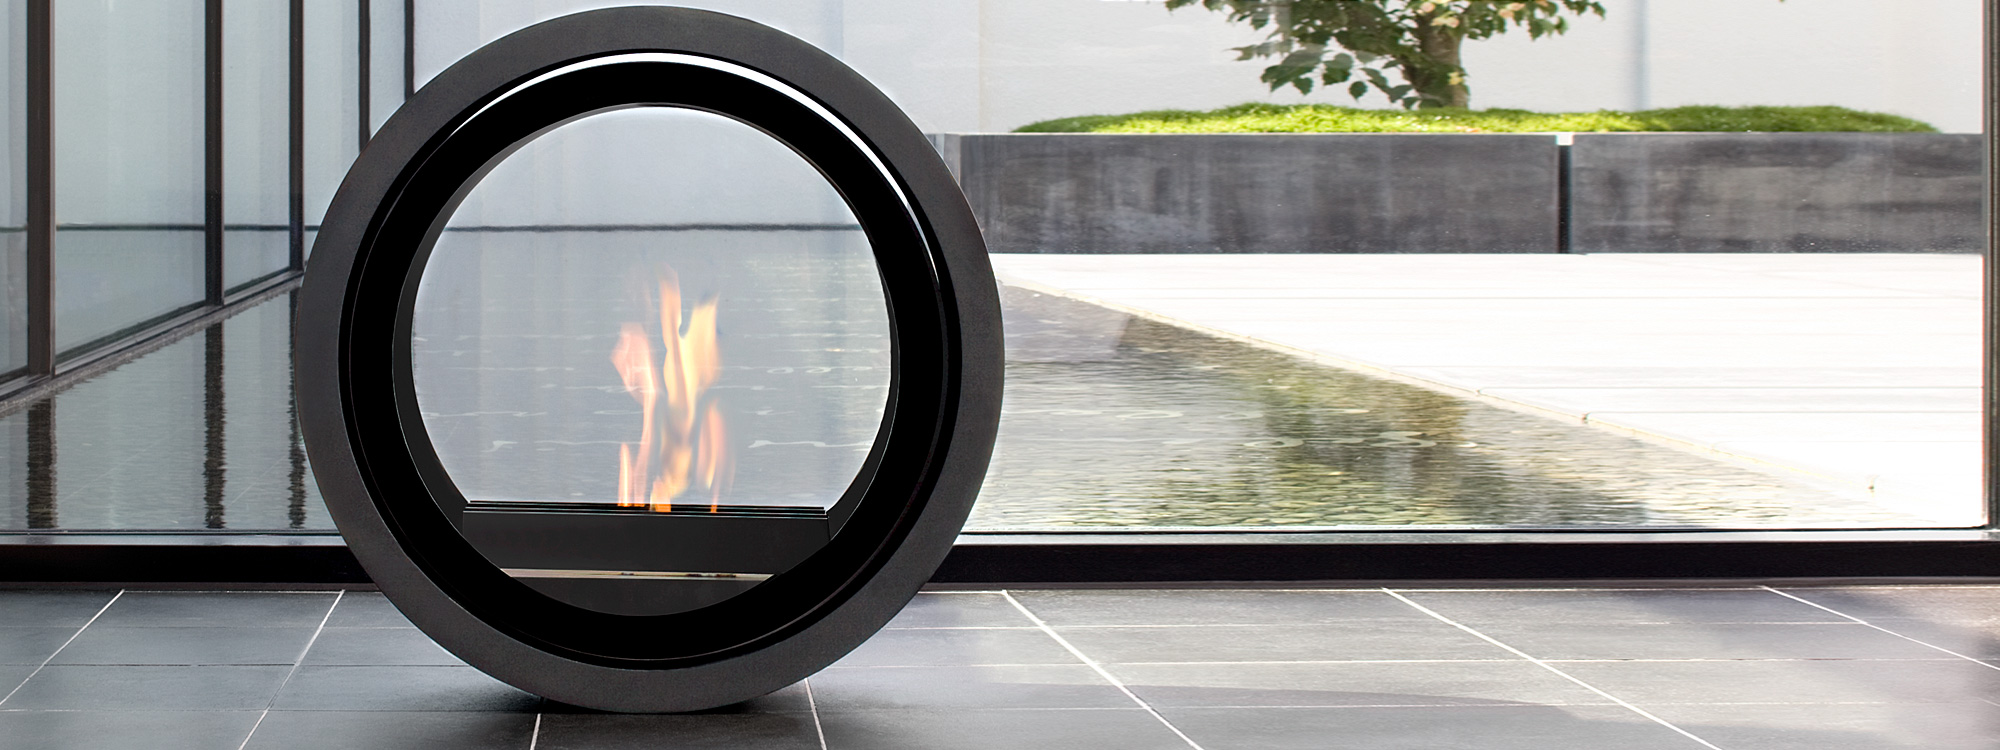 ROLL Circular Ethanol Fire Is A Modern Flueless Fire By Sieger Design. Roll Contemporary Bio Ethanol Fire Is Made In Luxury Alcohol Fireplace Materials And Is Manufactured By CONMOTO Modern Fireside Accessories Company, Germany.